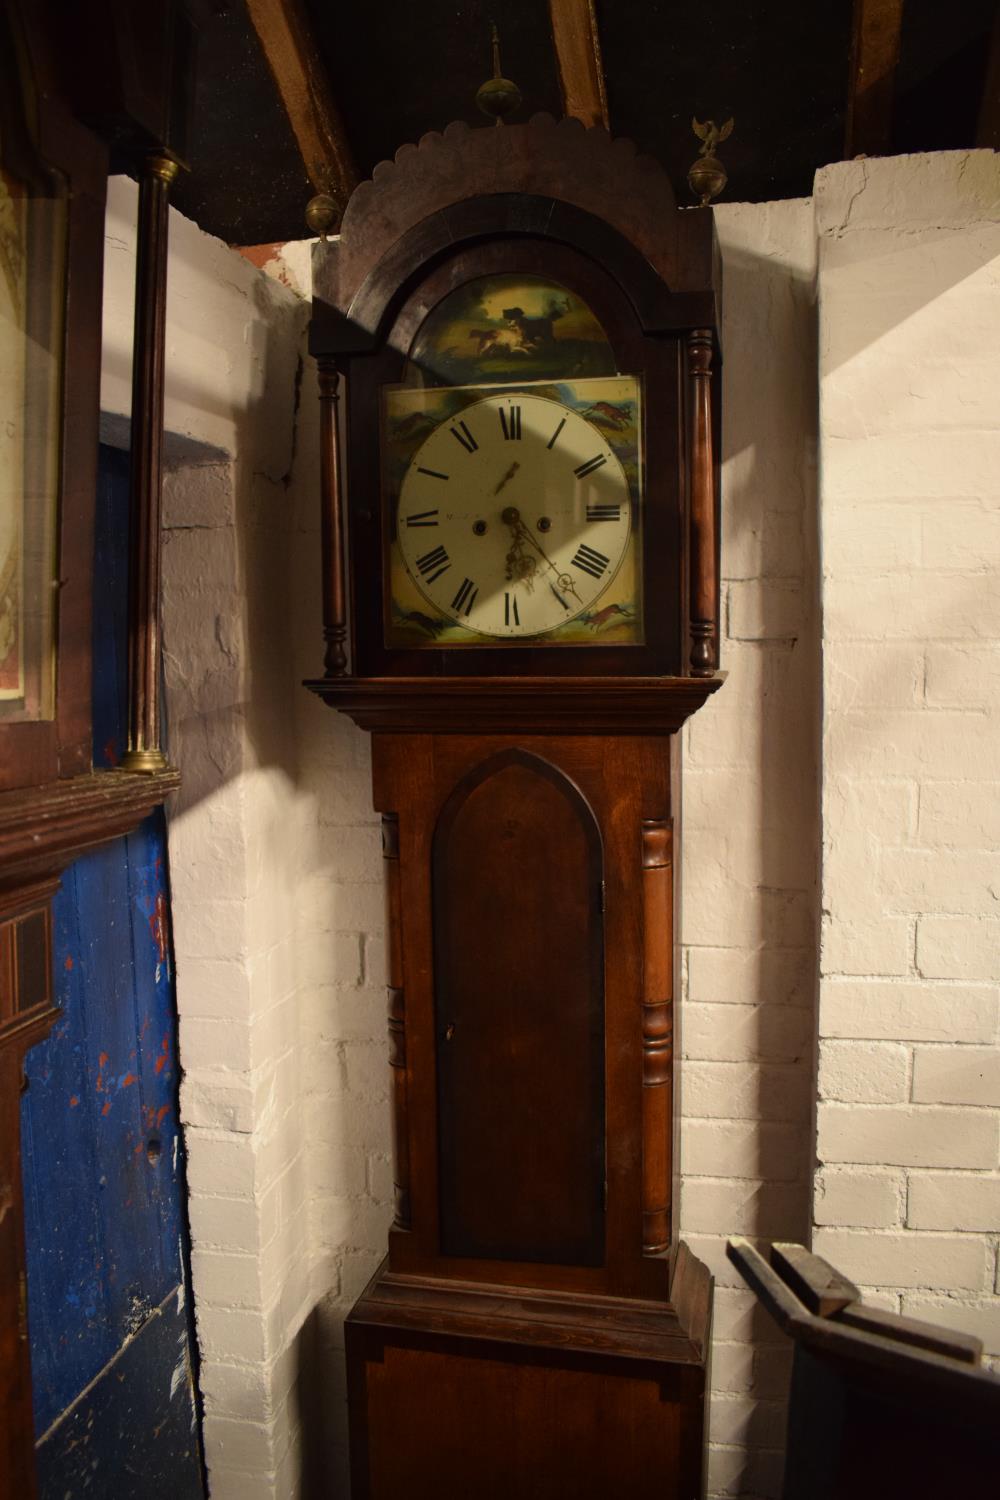 Victorian Grandfather clock, possibly from Sale, Manchester with hunting scenes